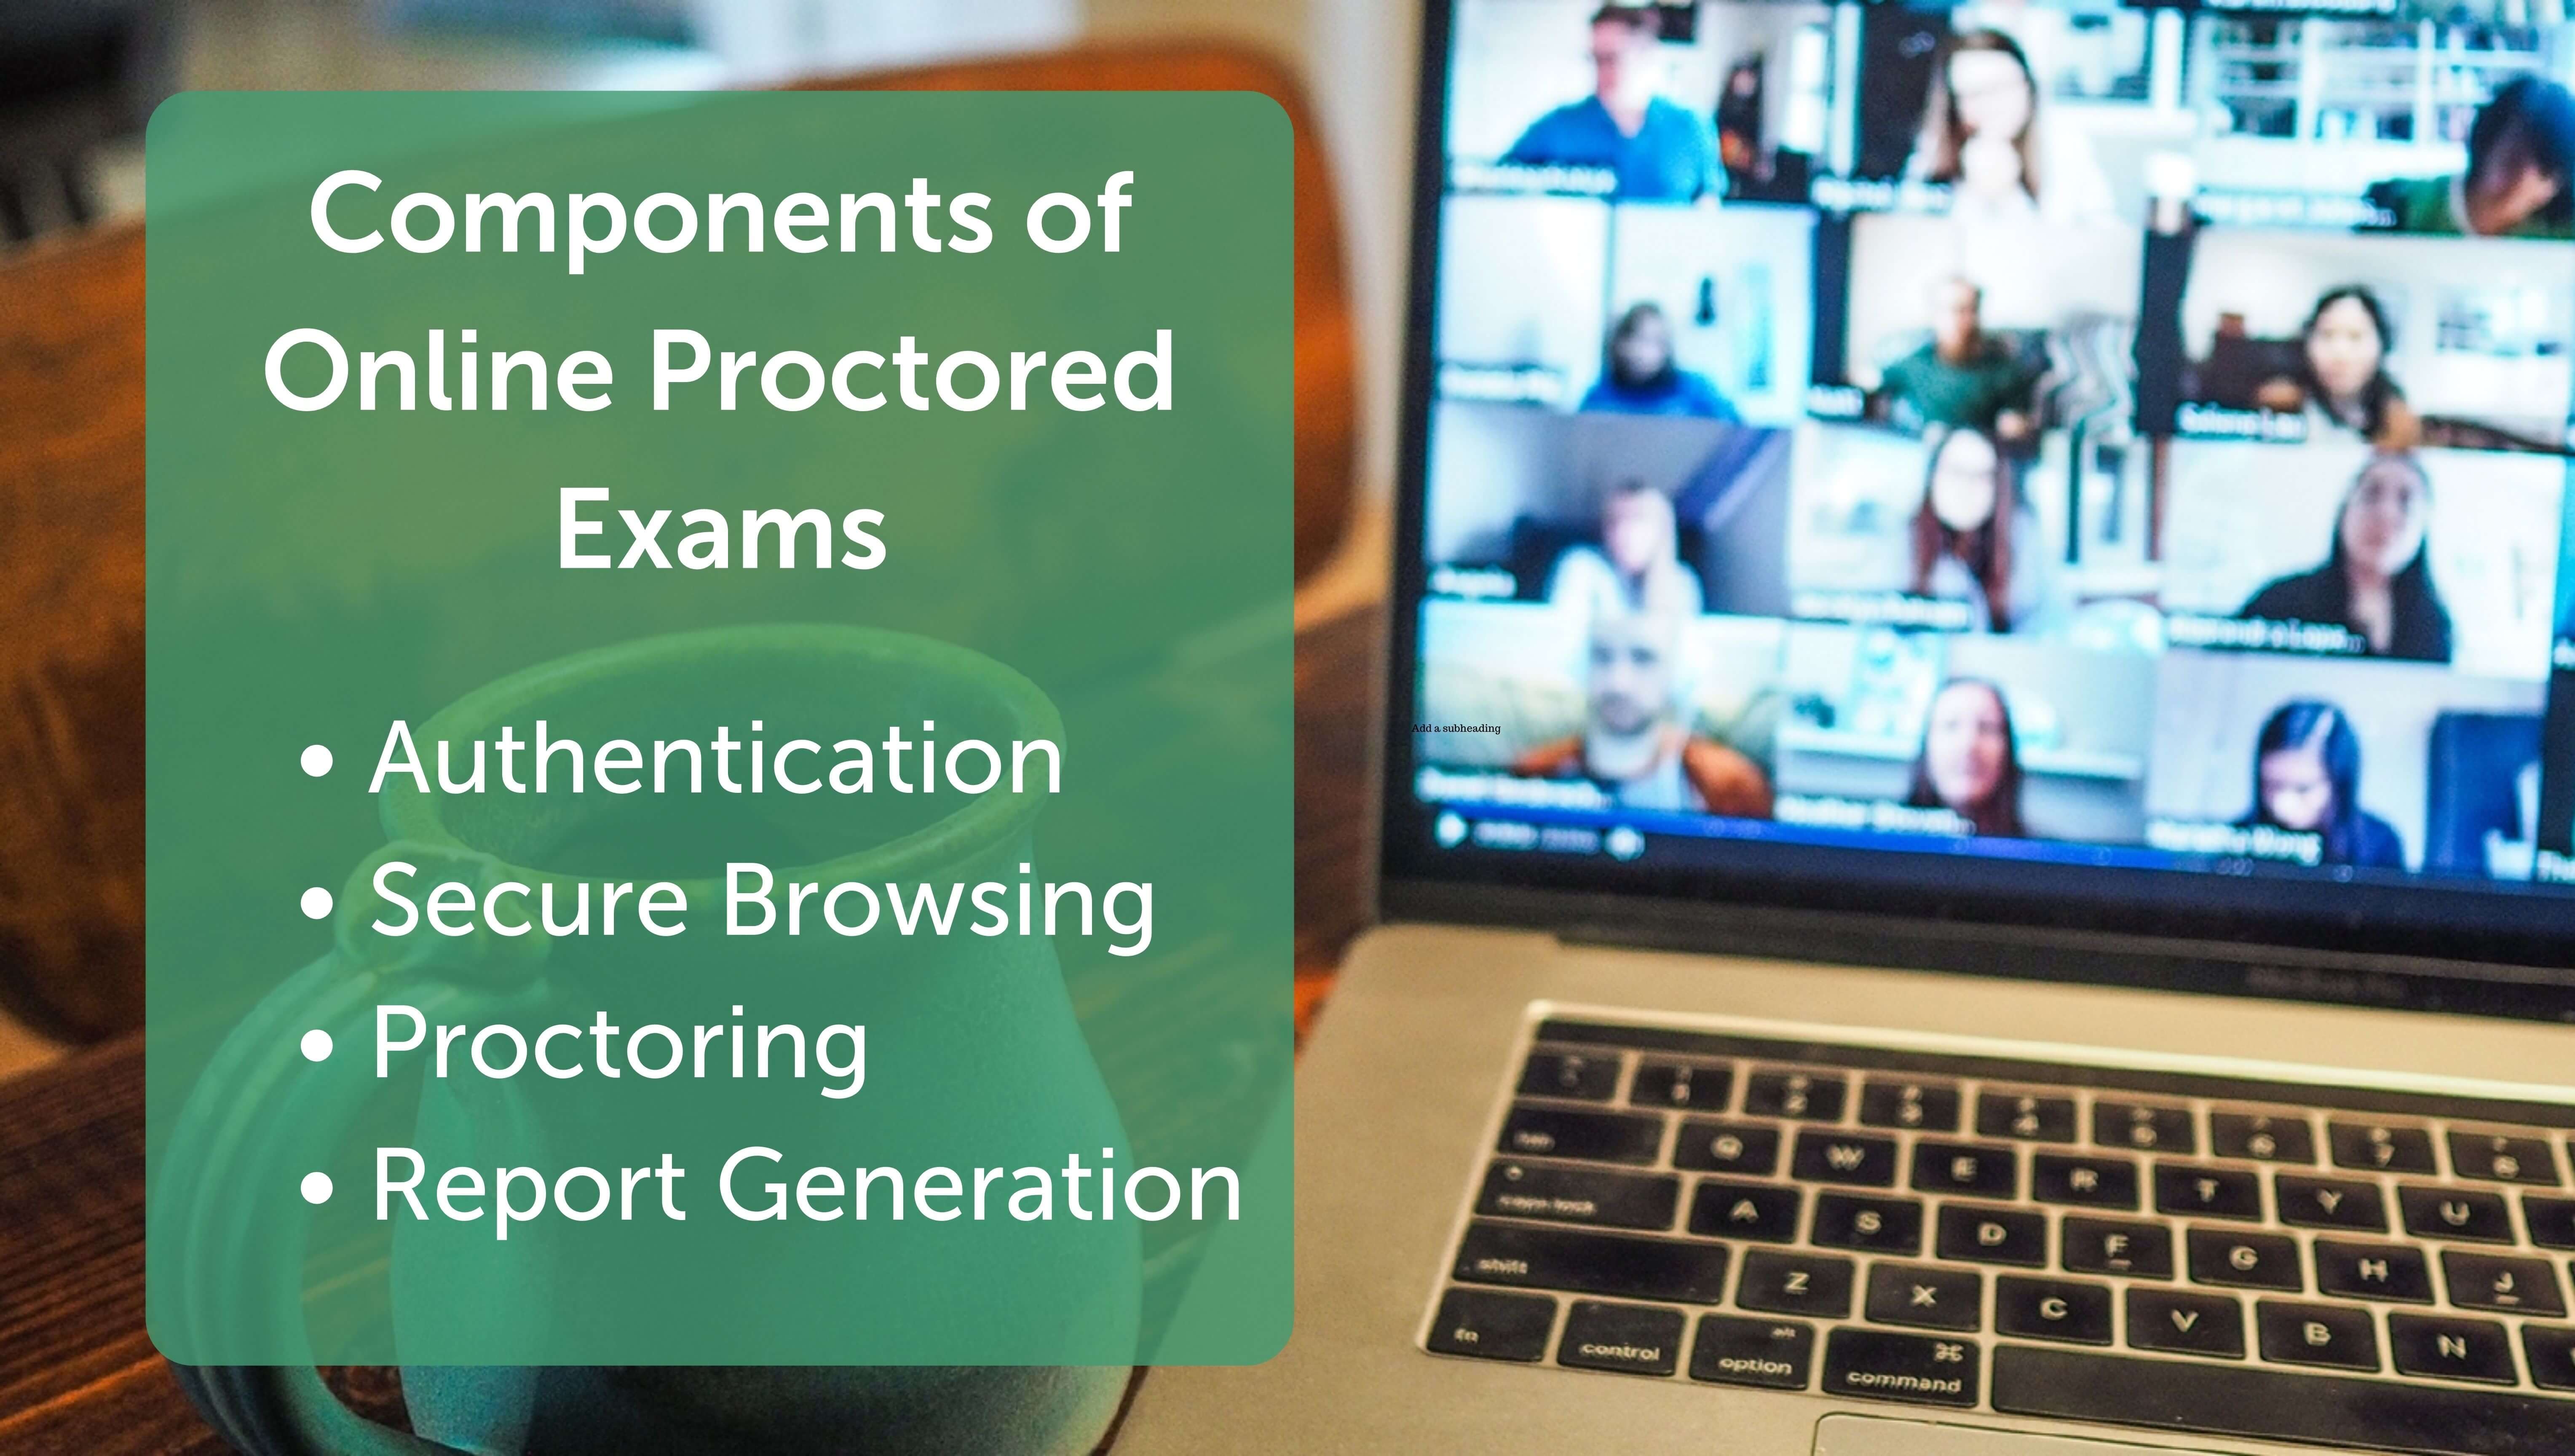 Online Proctored Exams components